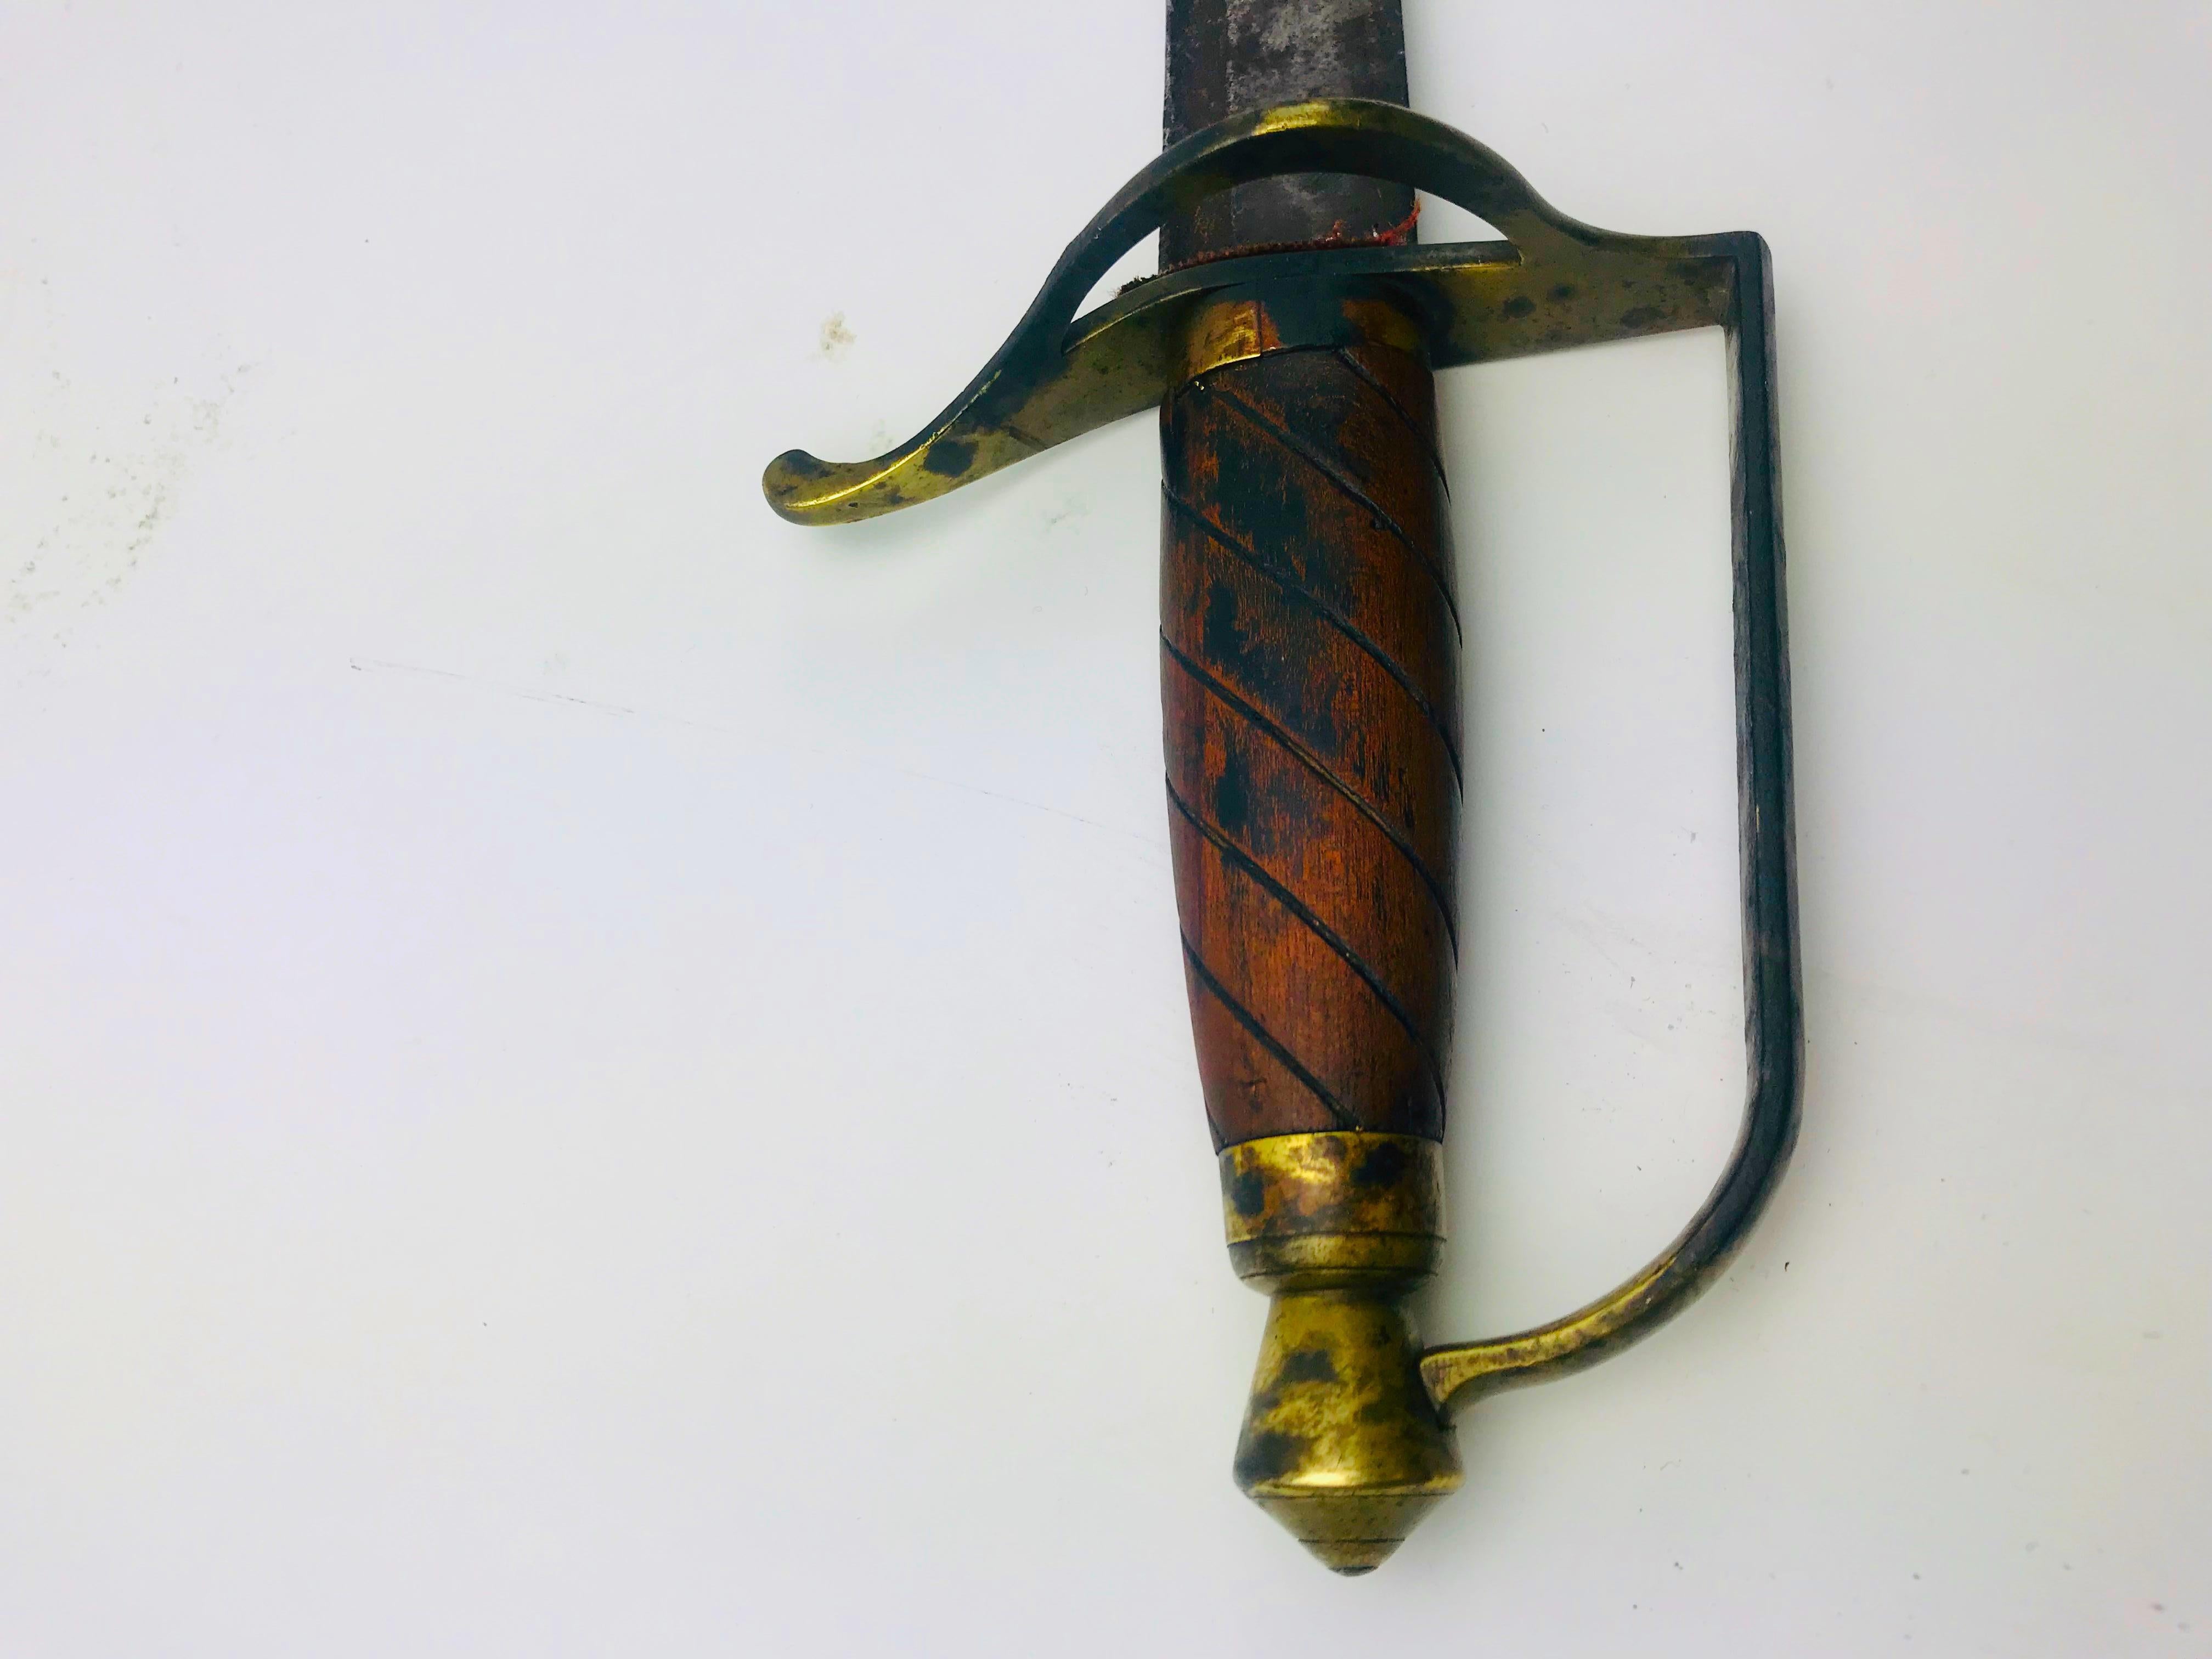 Late 18th Century Revoluntionary War Officer's Combat Sword Jeremiah Snow, Ma